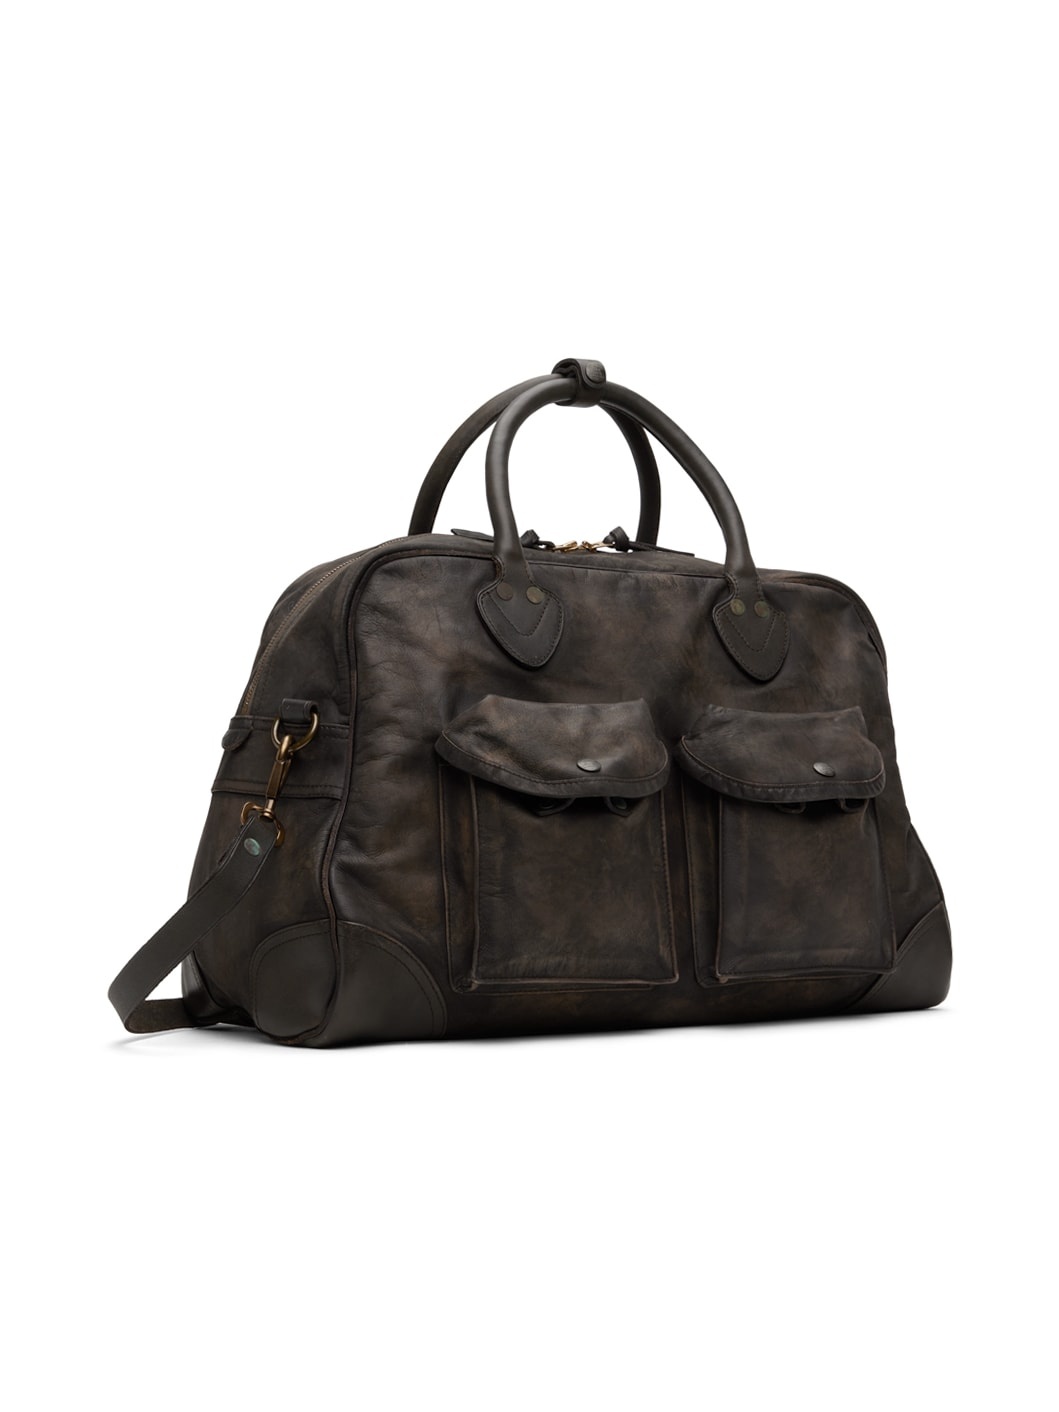 Brown Leather Duffle Bag - 2